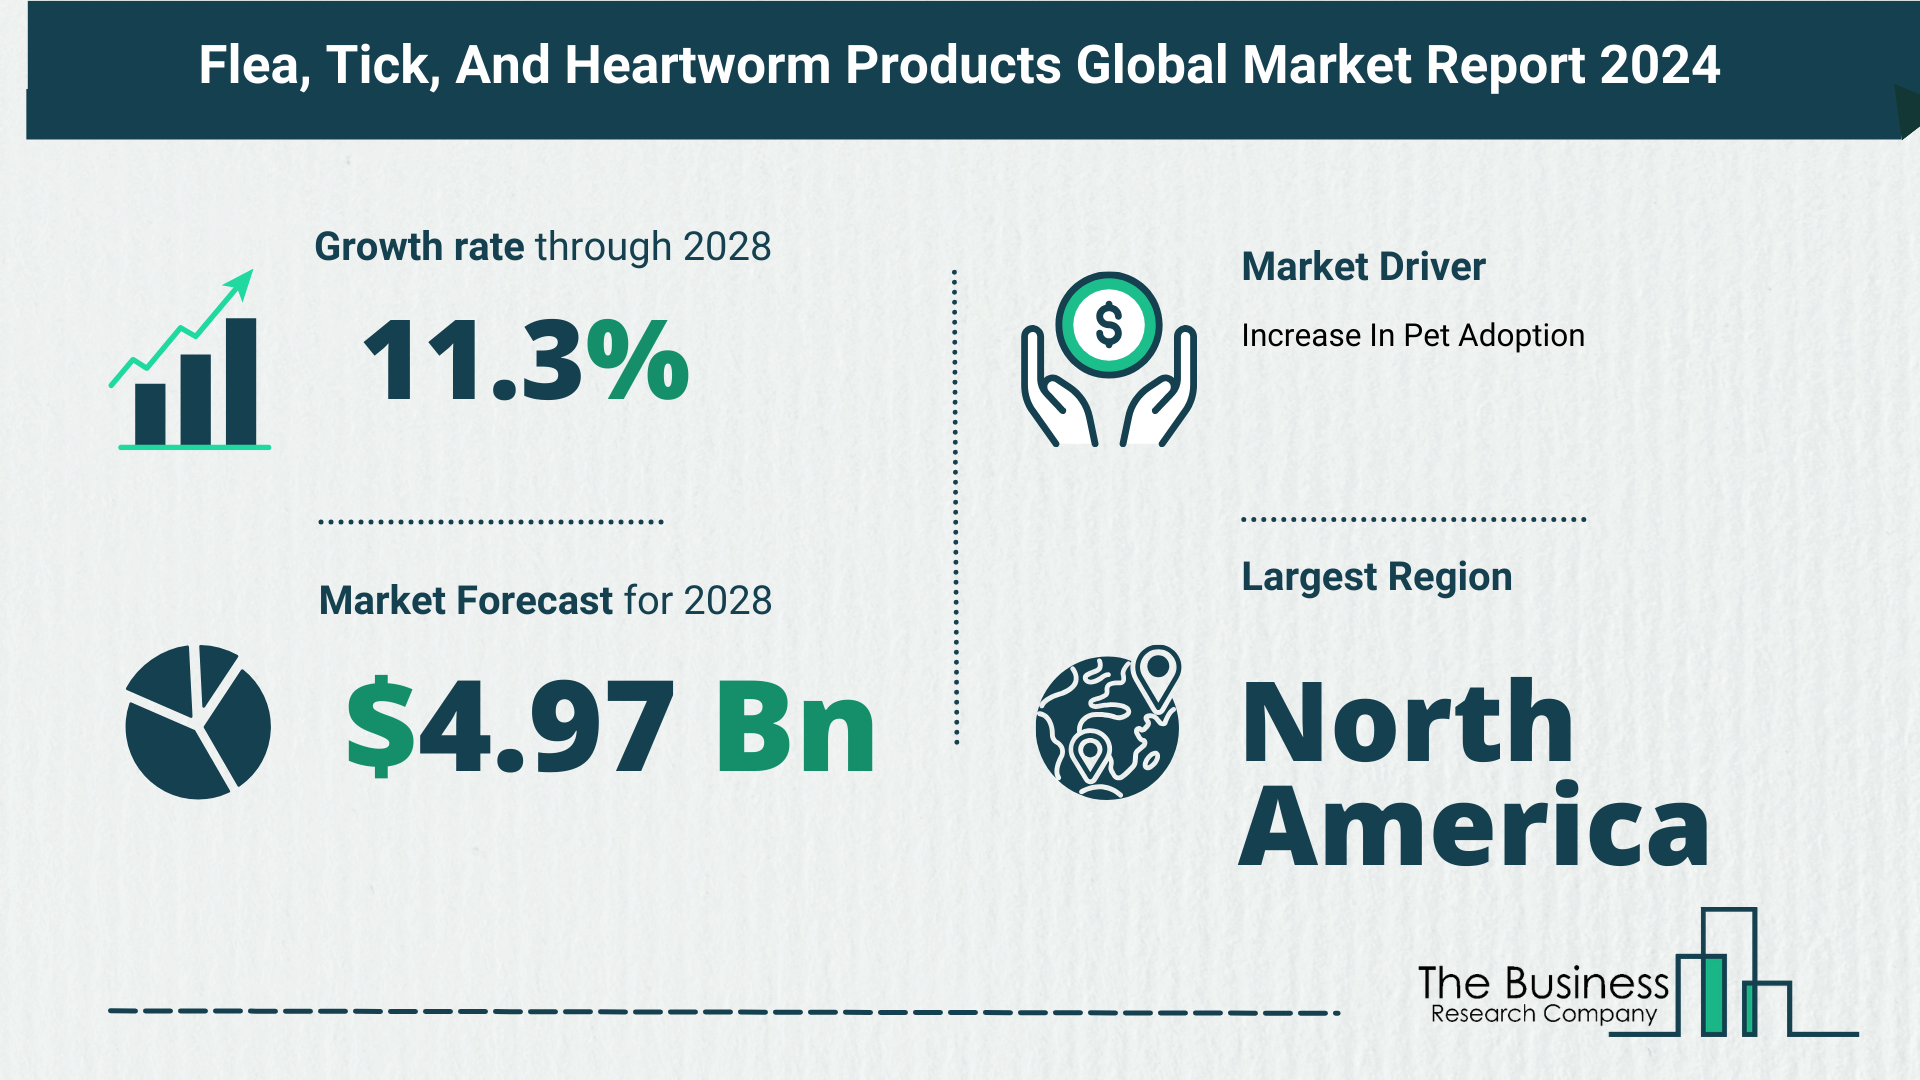 Global Flea, Tick, And Heartworm Products Market Overview 2024: Size, Drivers, And Trends